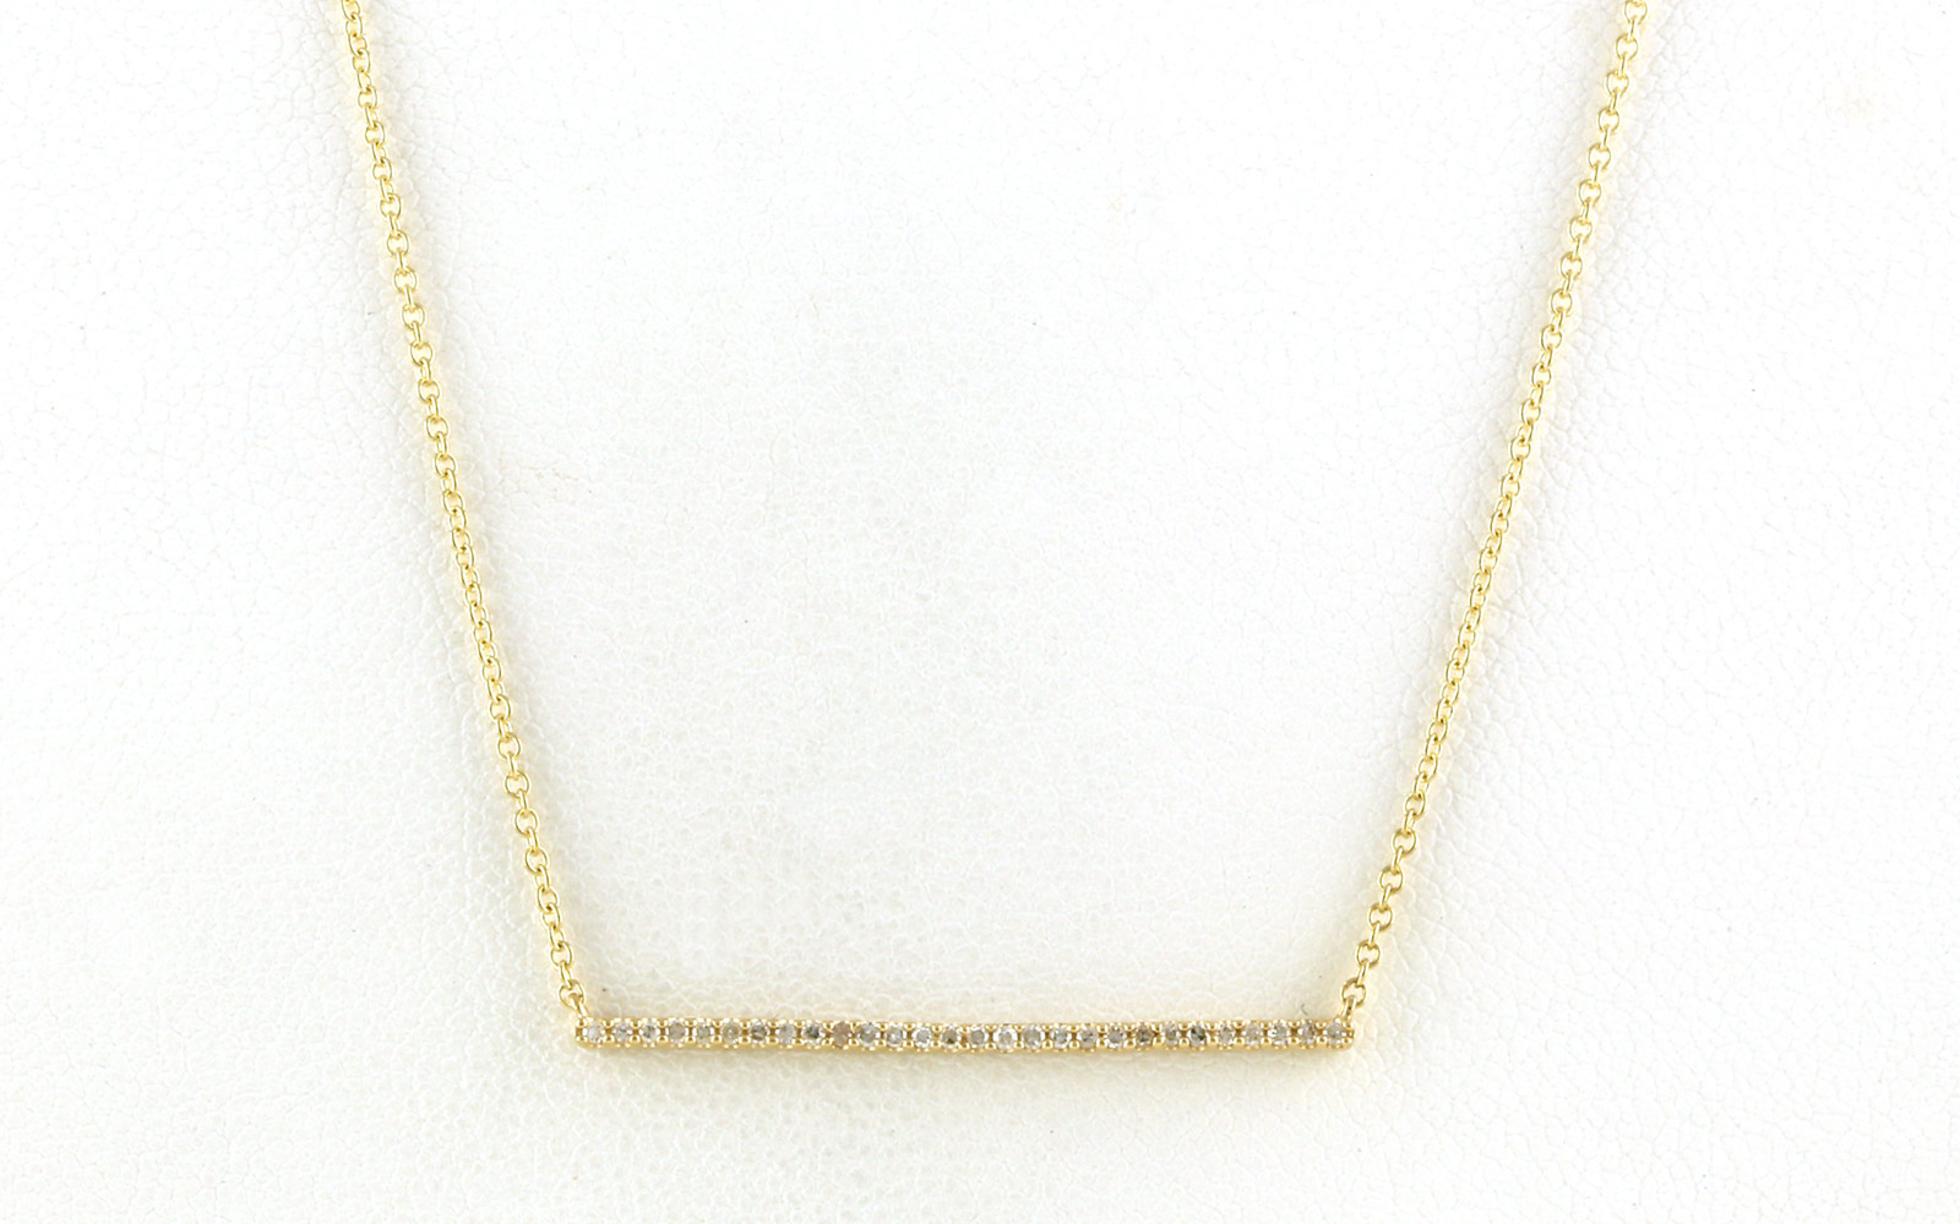 28-Stone Bar-style Diamond Necklace in Yellow Gold